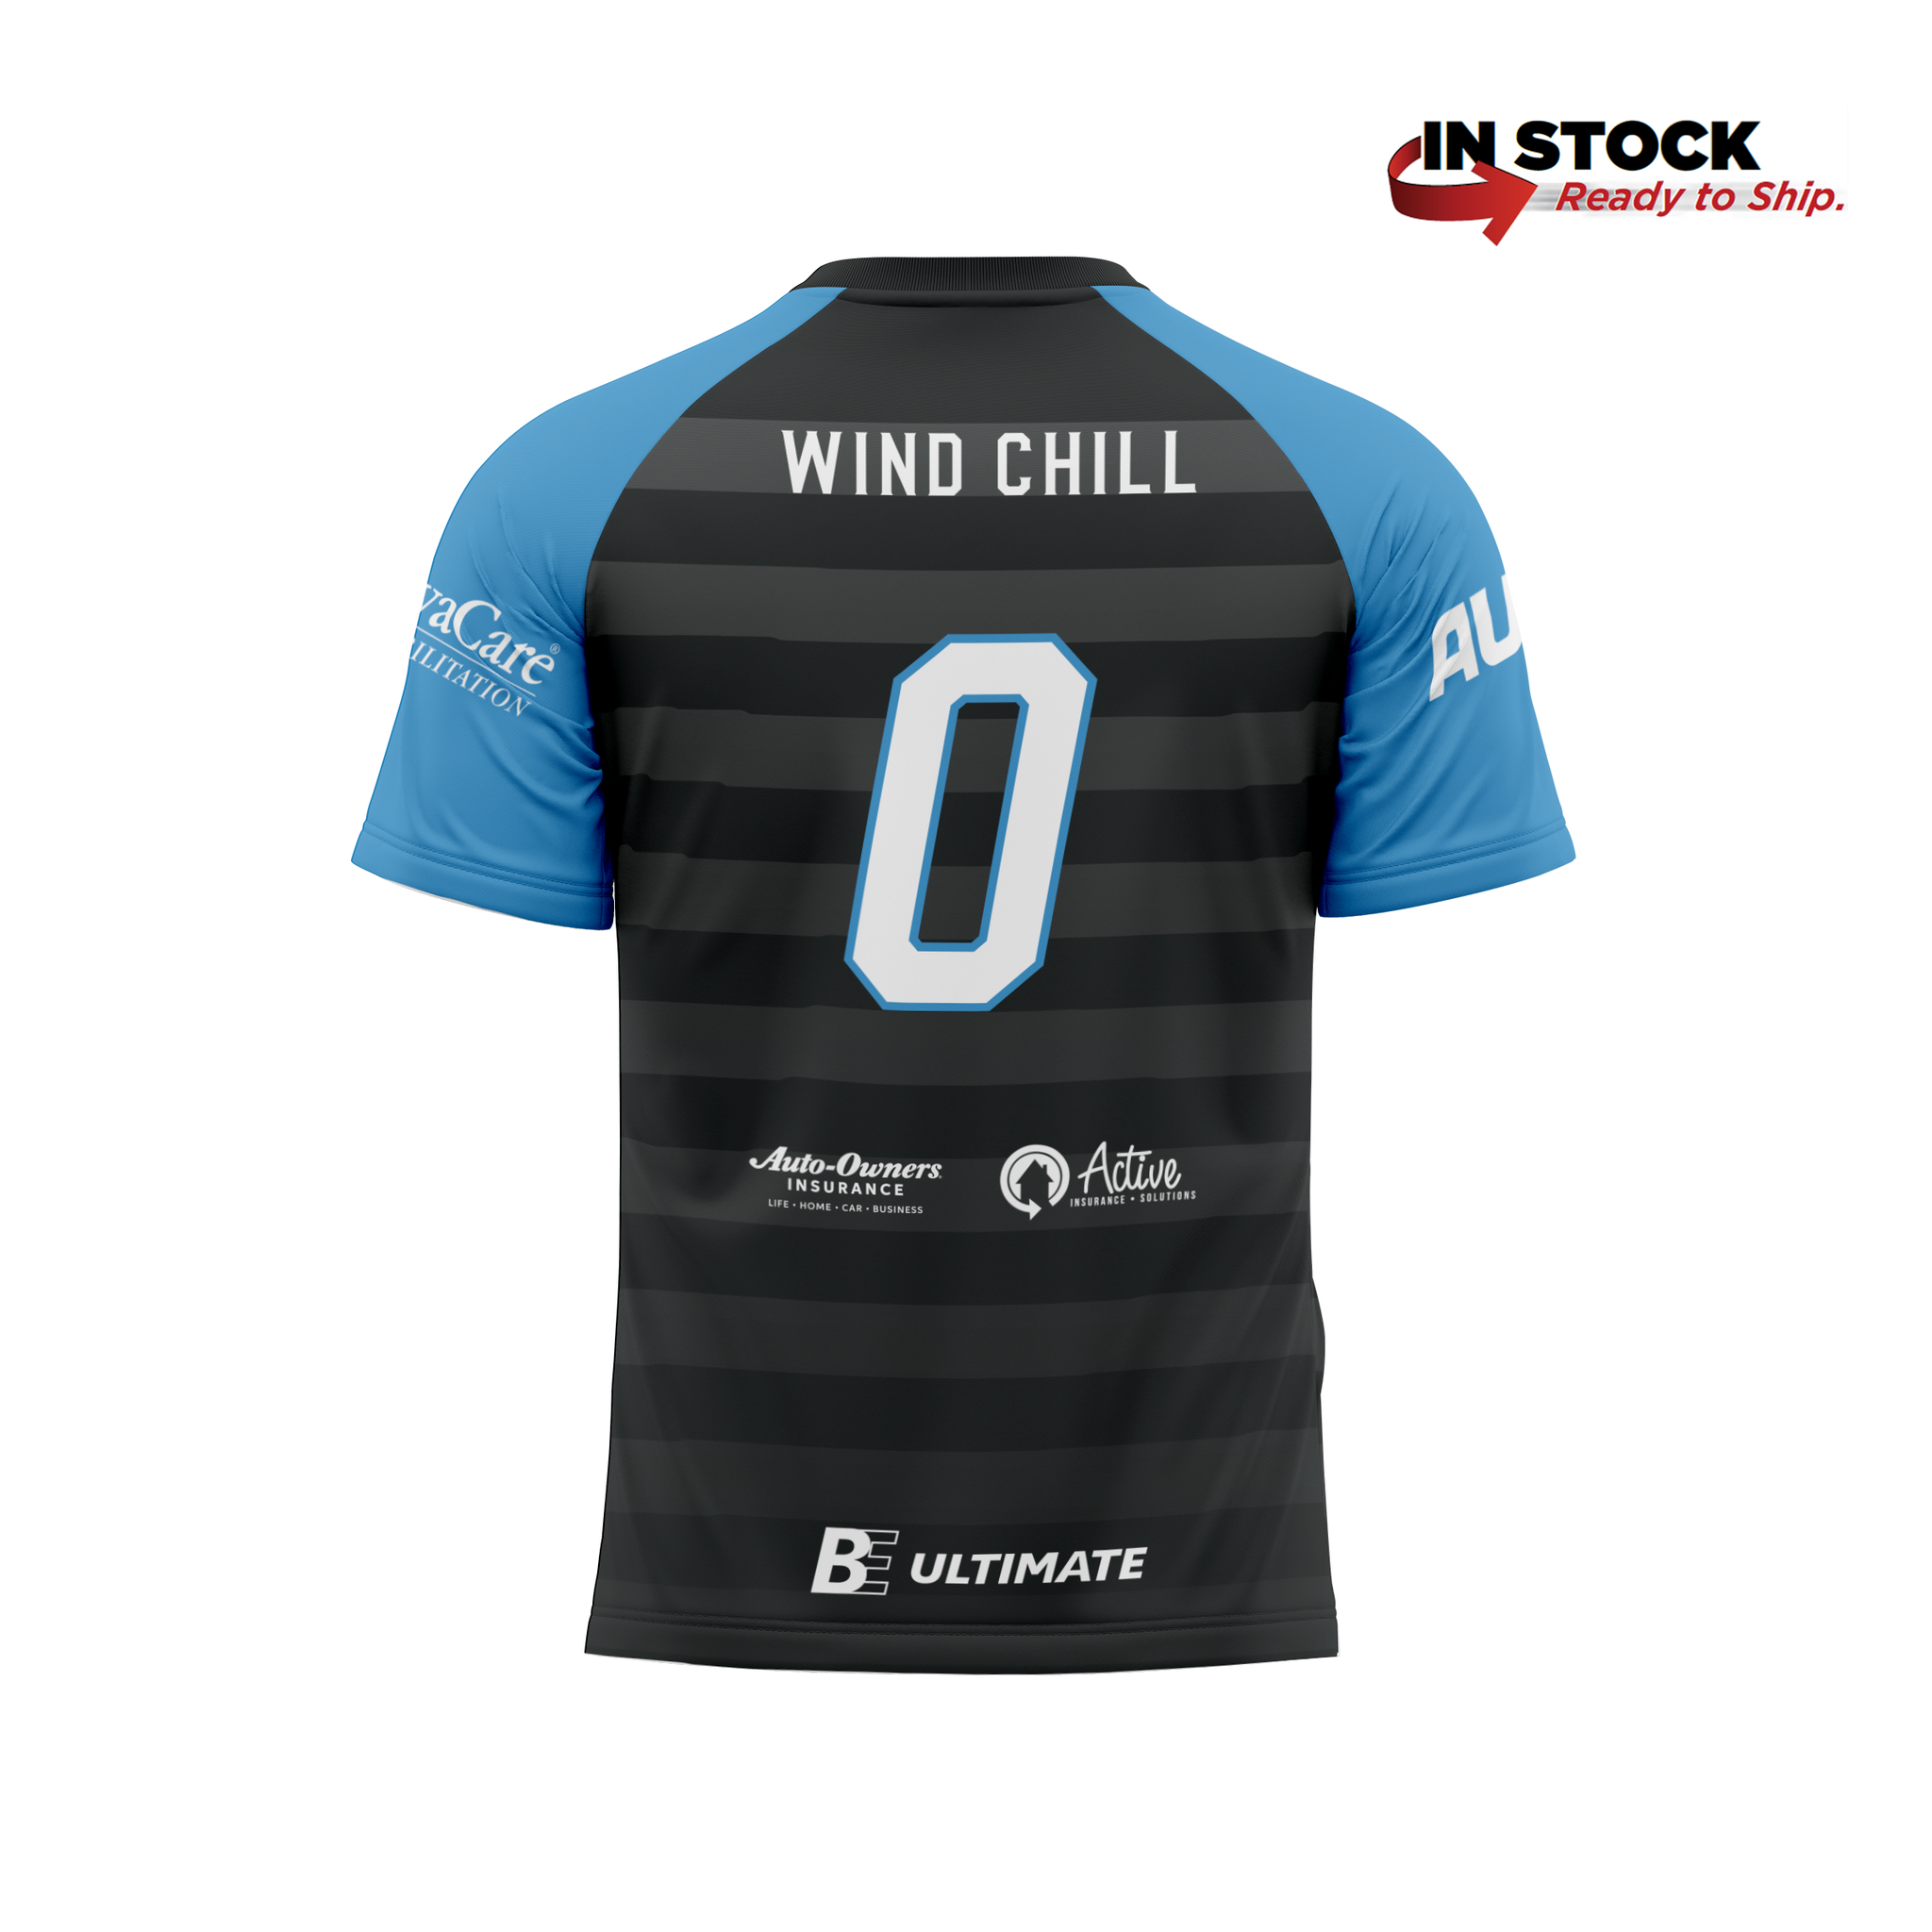 Wind Chill 2023 Home Replica Jersey - Wind Chill #0 - Ready to Ship